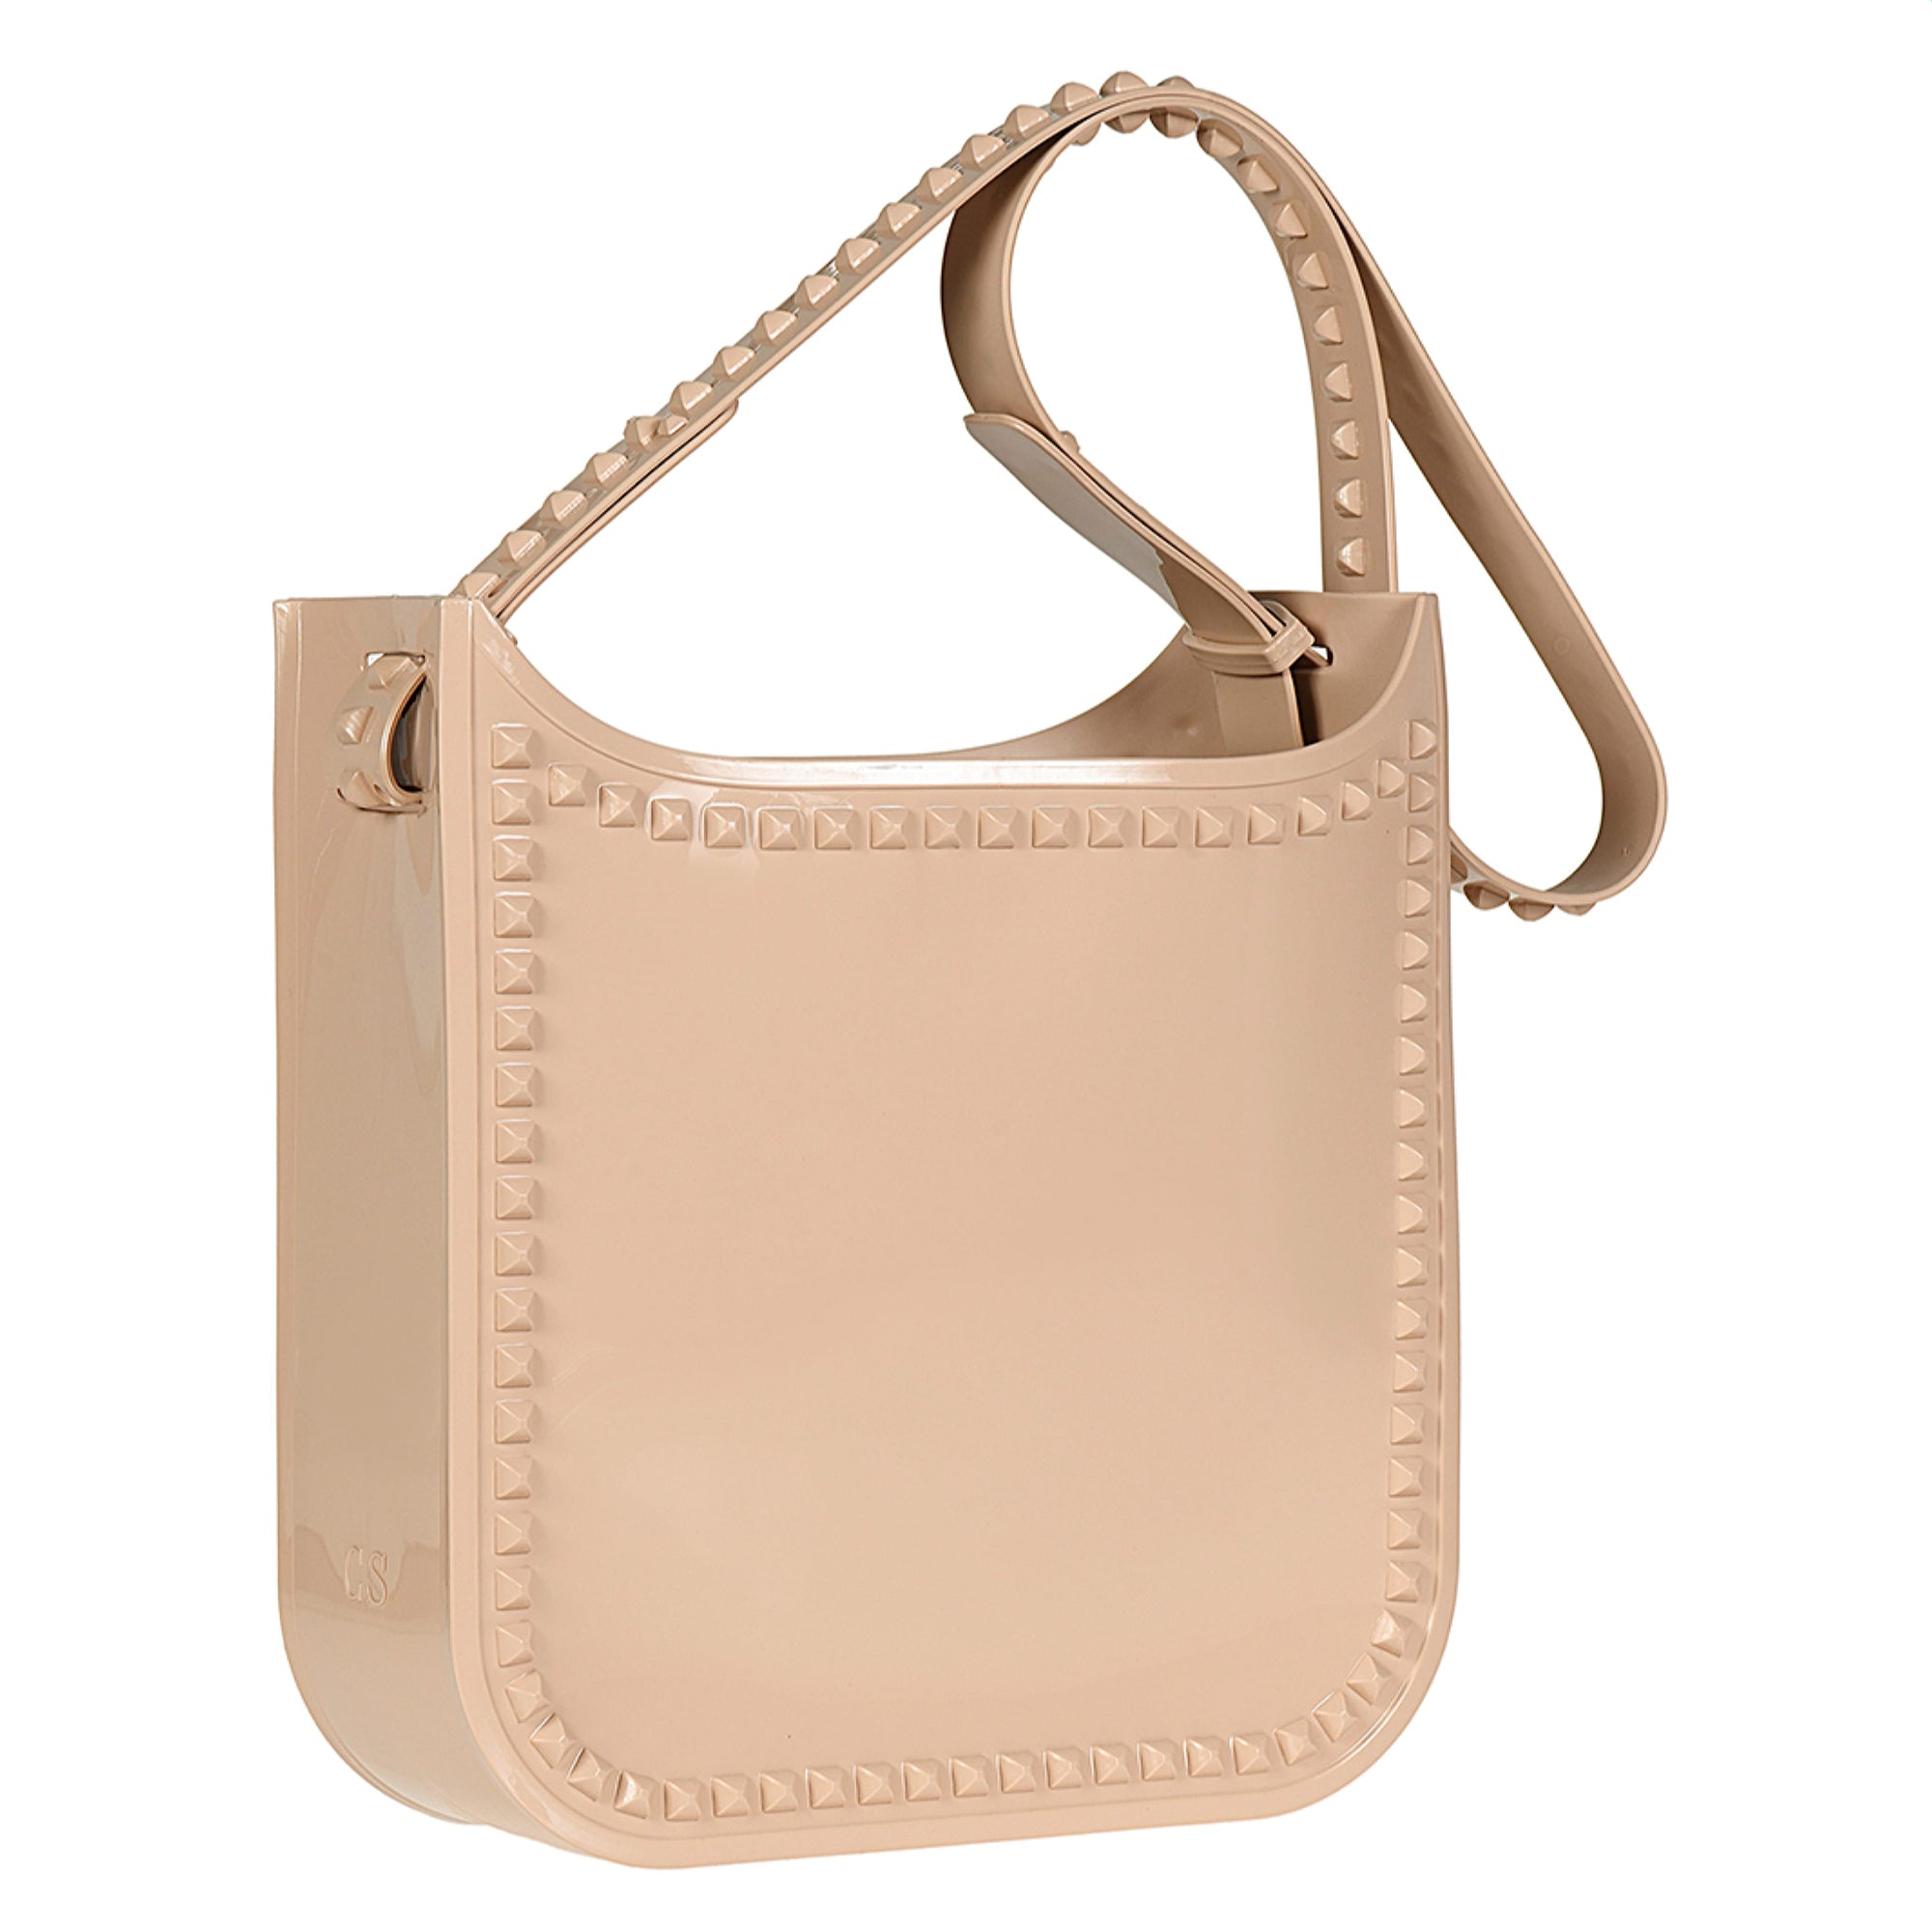 Jelly crossbody purse in blush with studs